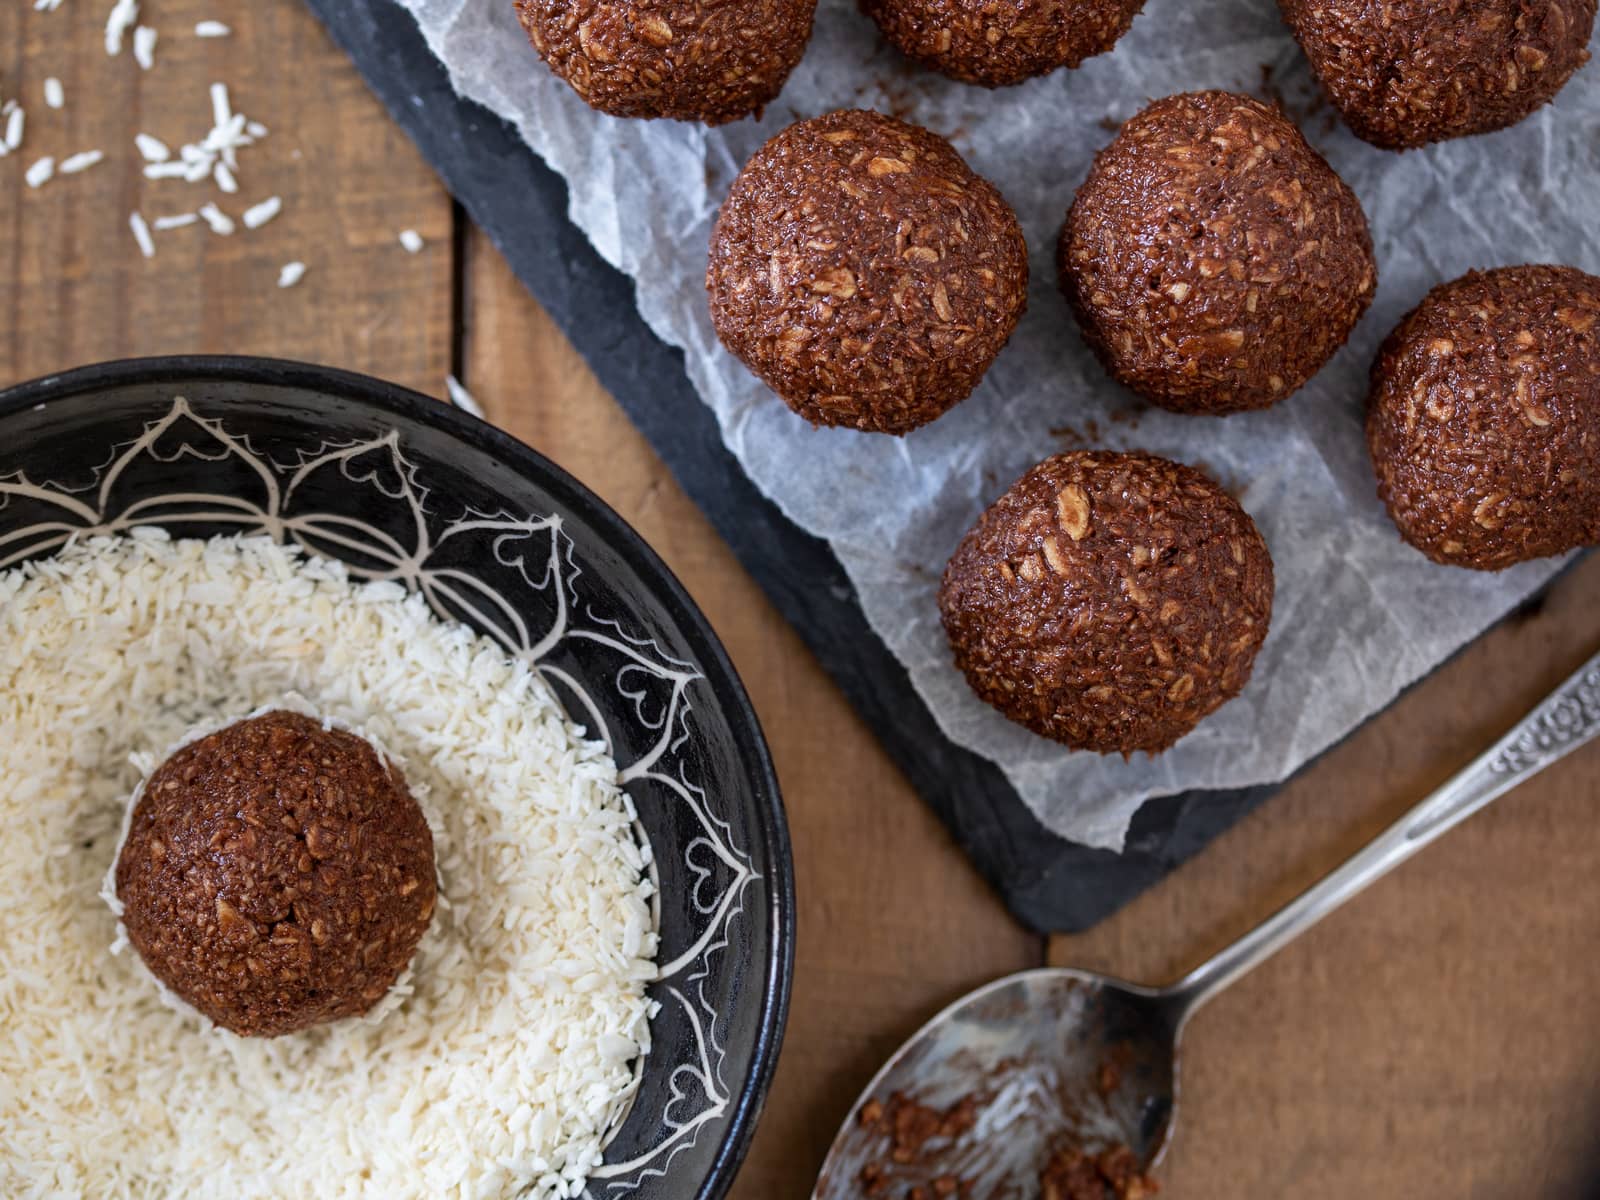 Chocolate oatmeal balls being tossed in shredded coconut.